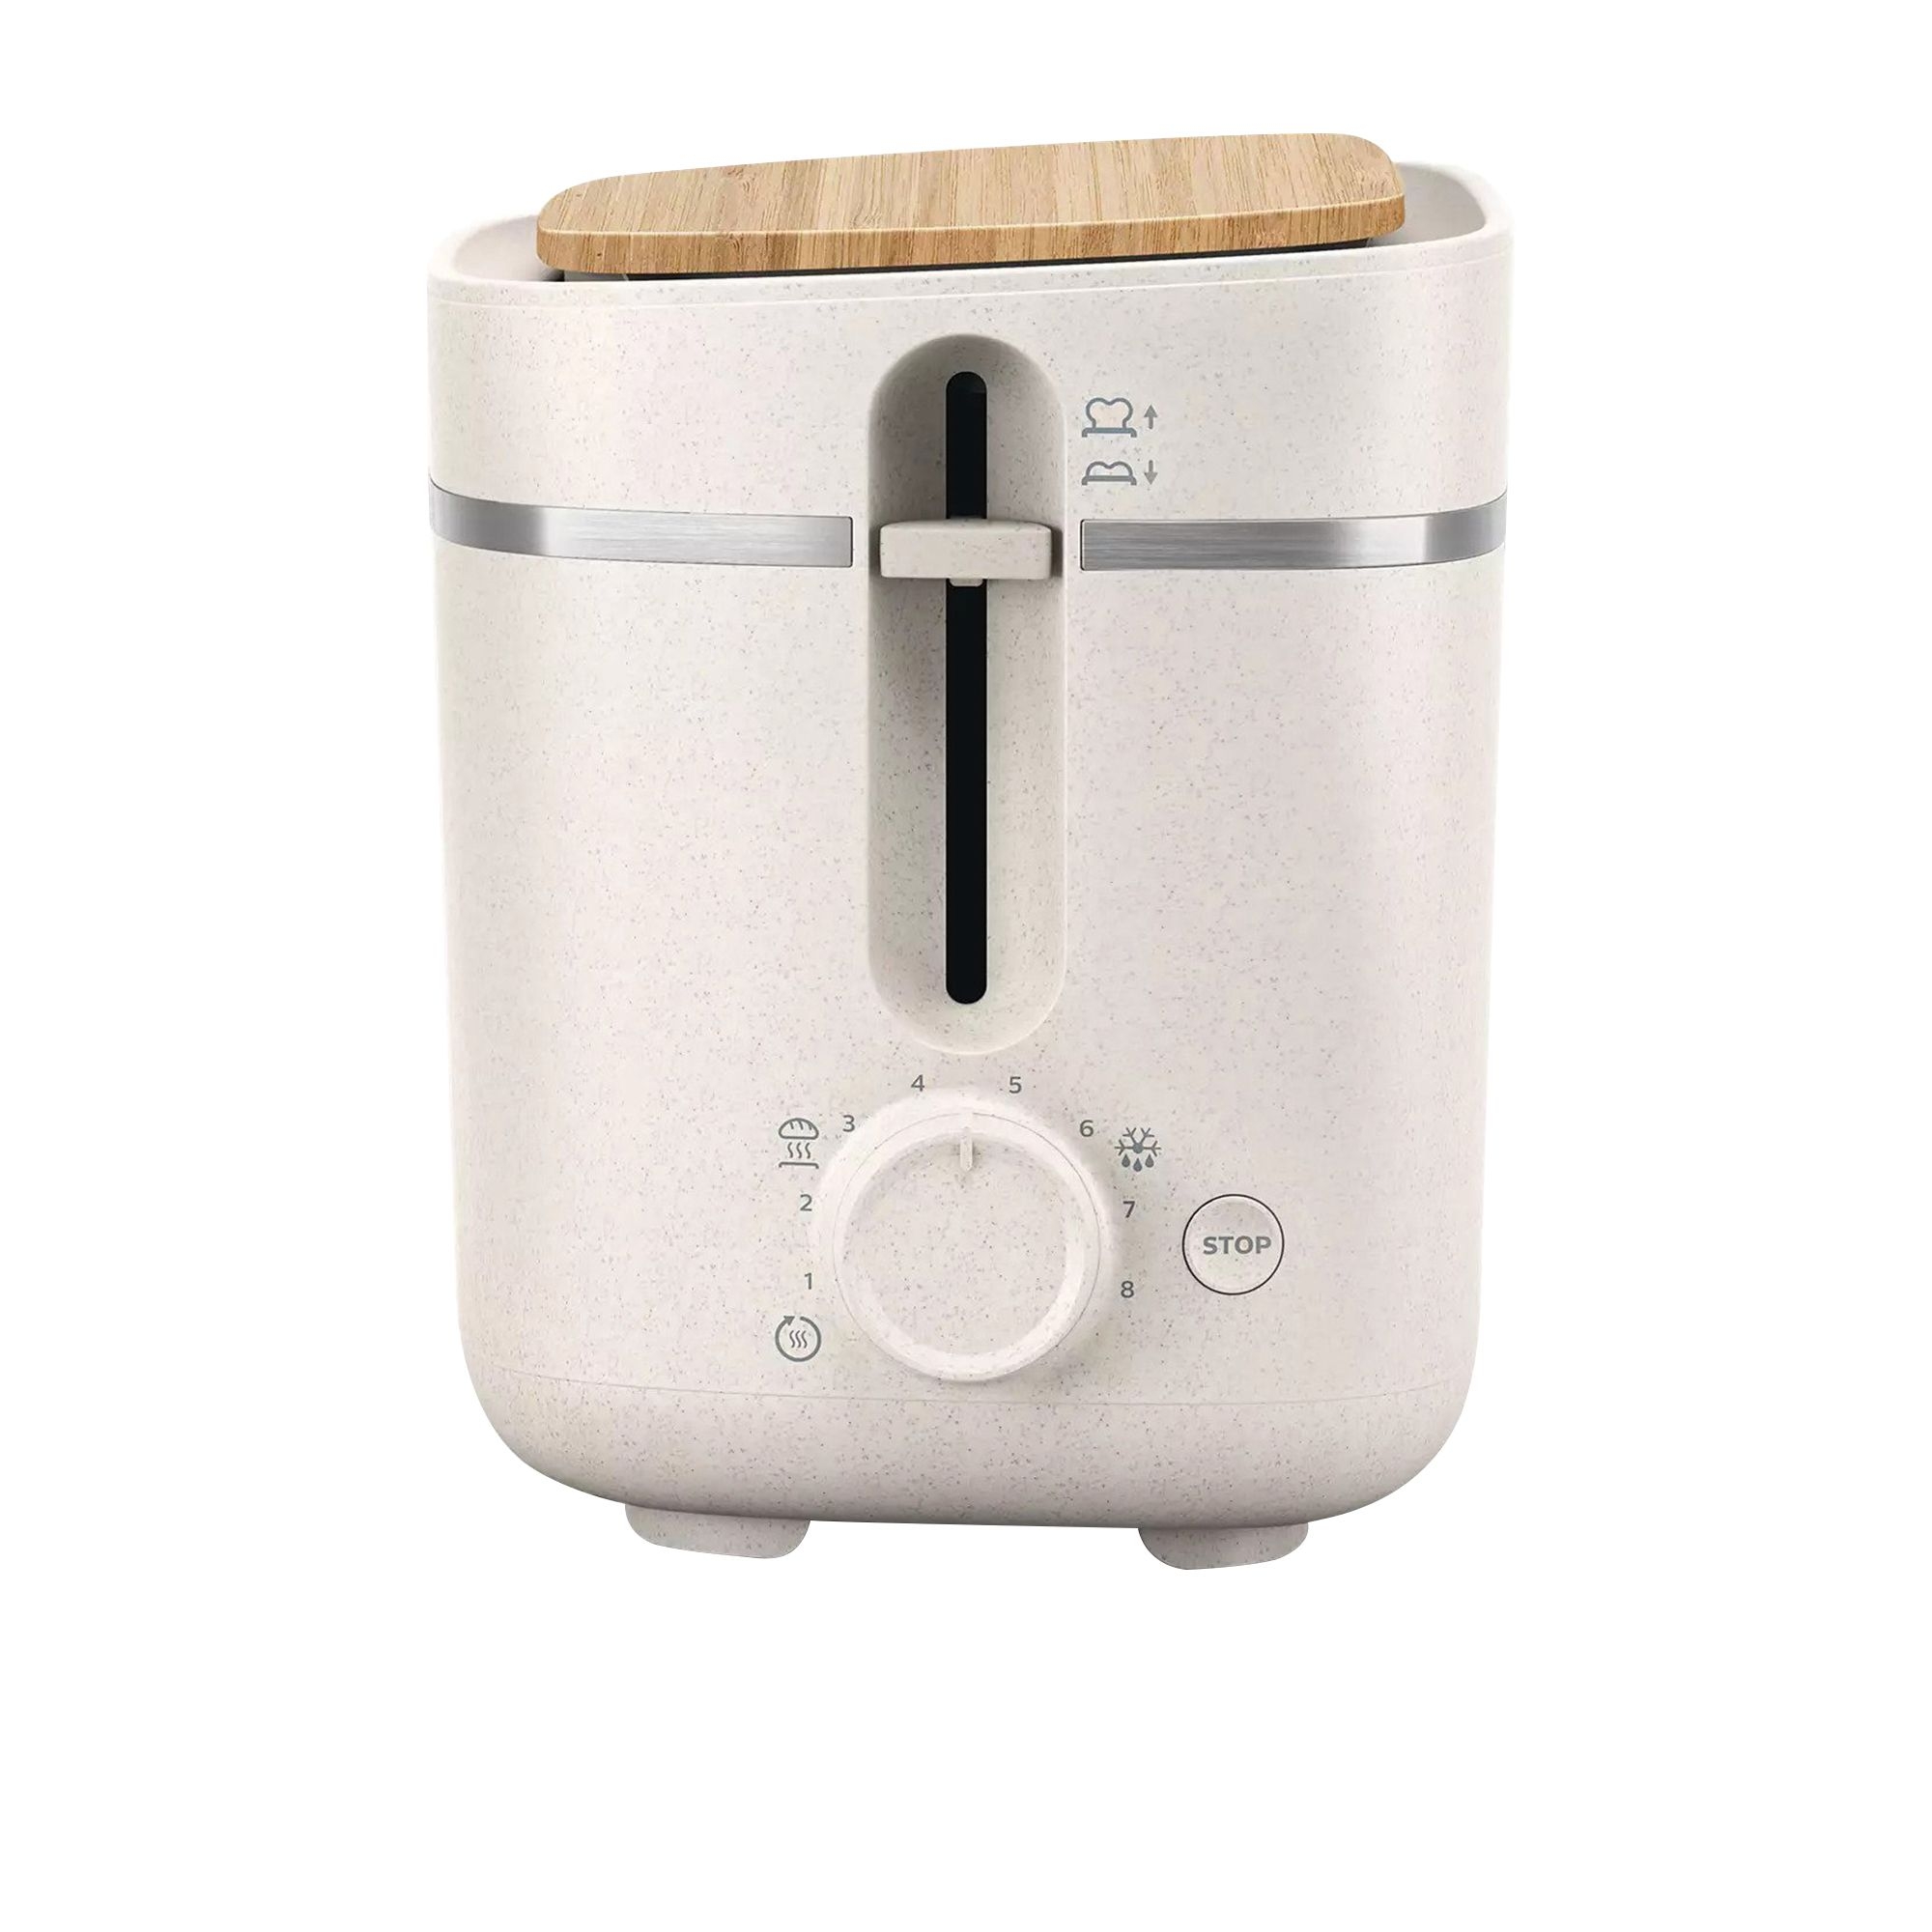 Philips Eco Collection 5000 Series 2 Slice Toaster Image 1